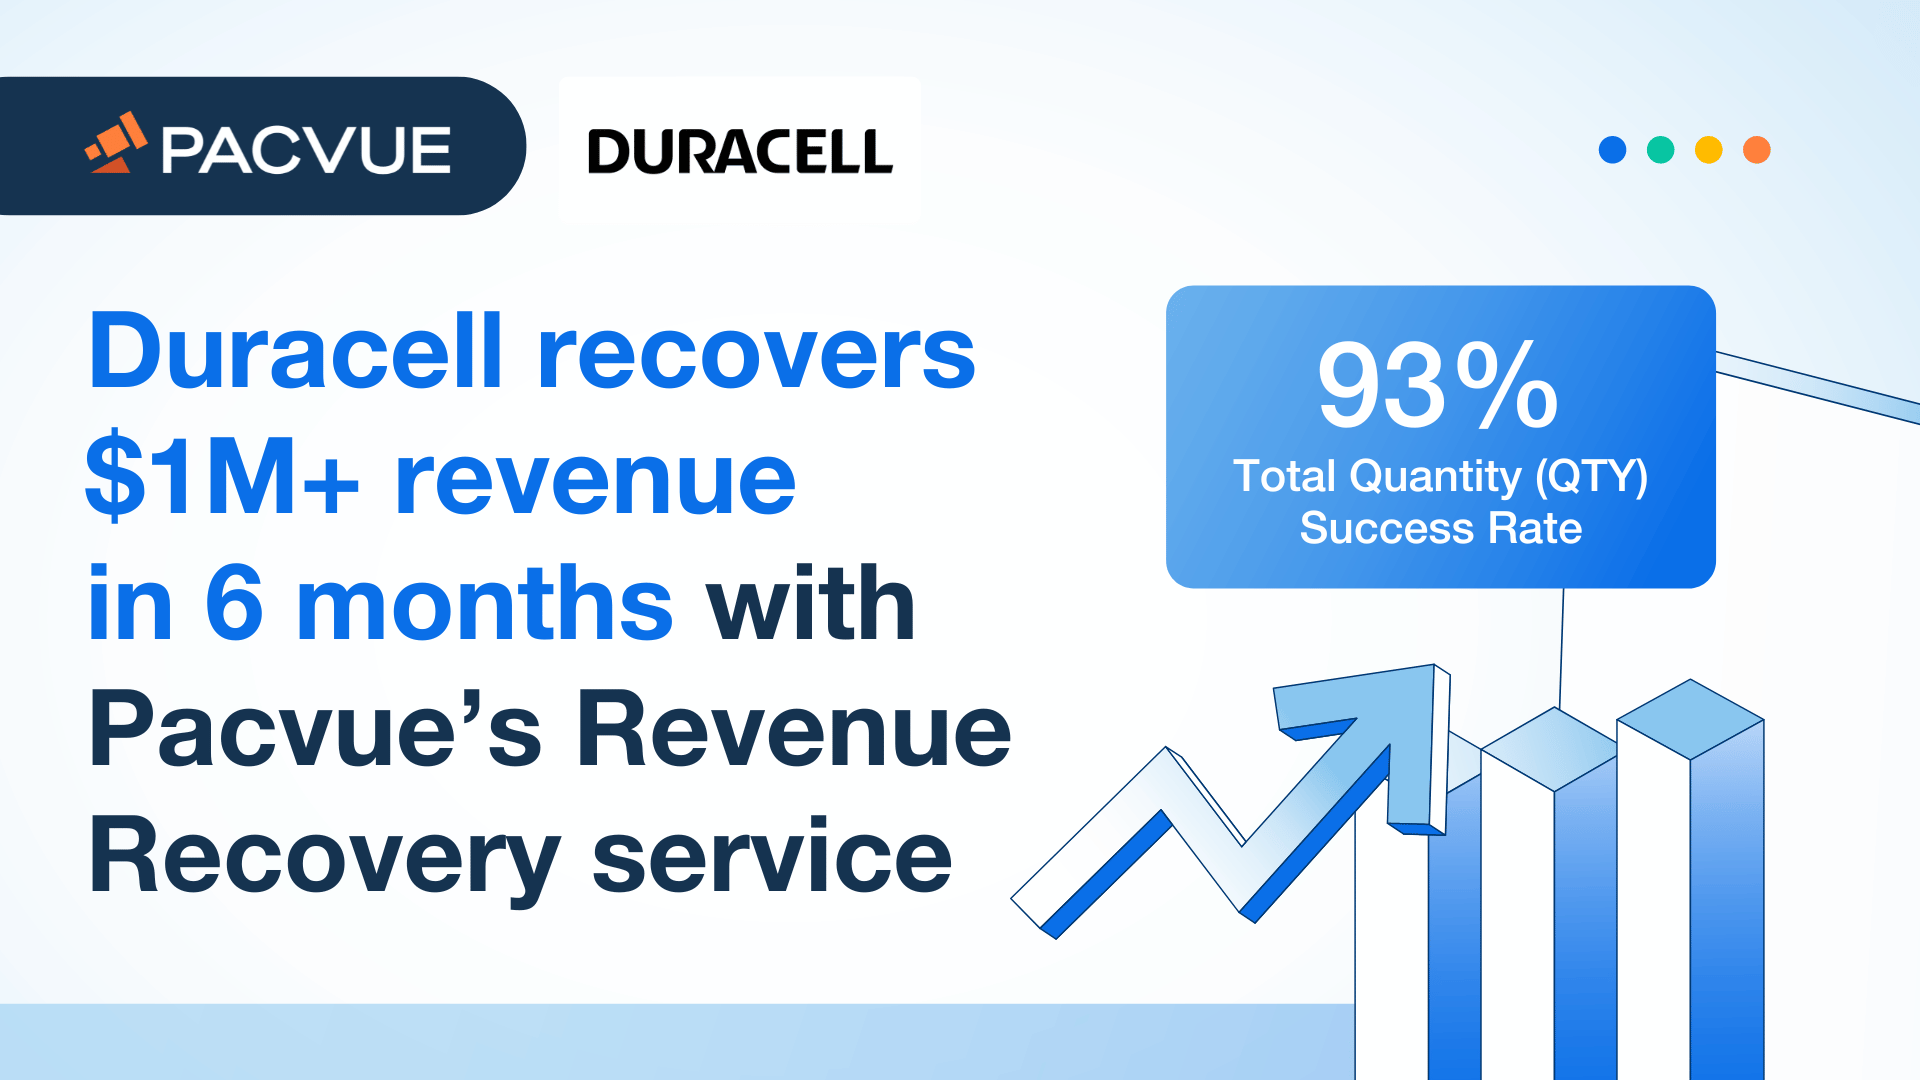 Duracell recovers $1M+ revenue in 6 months with Pacvue's Revenue Recovery service